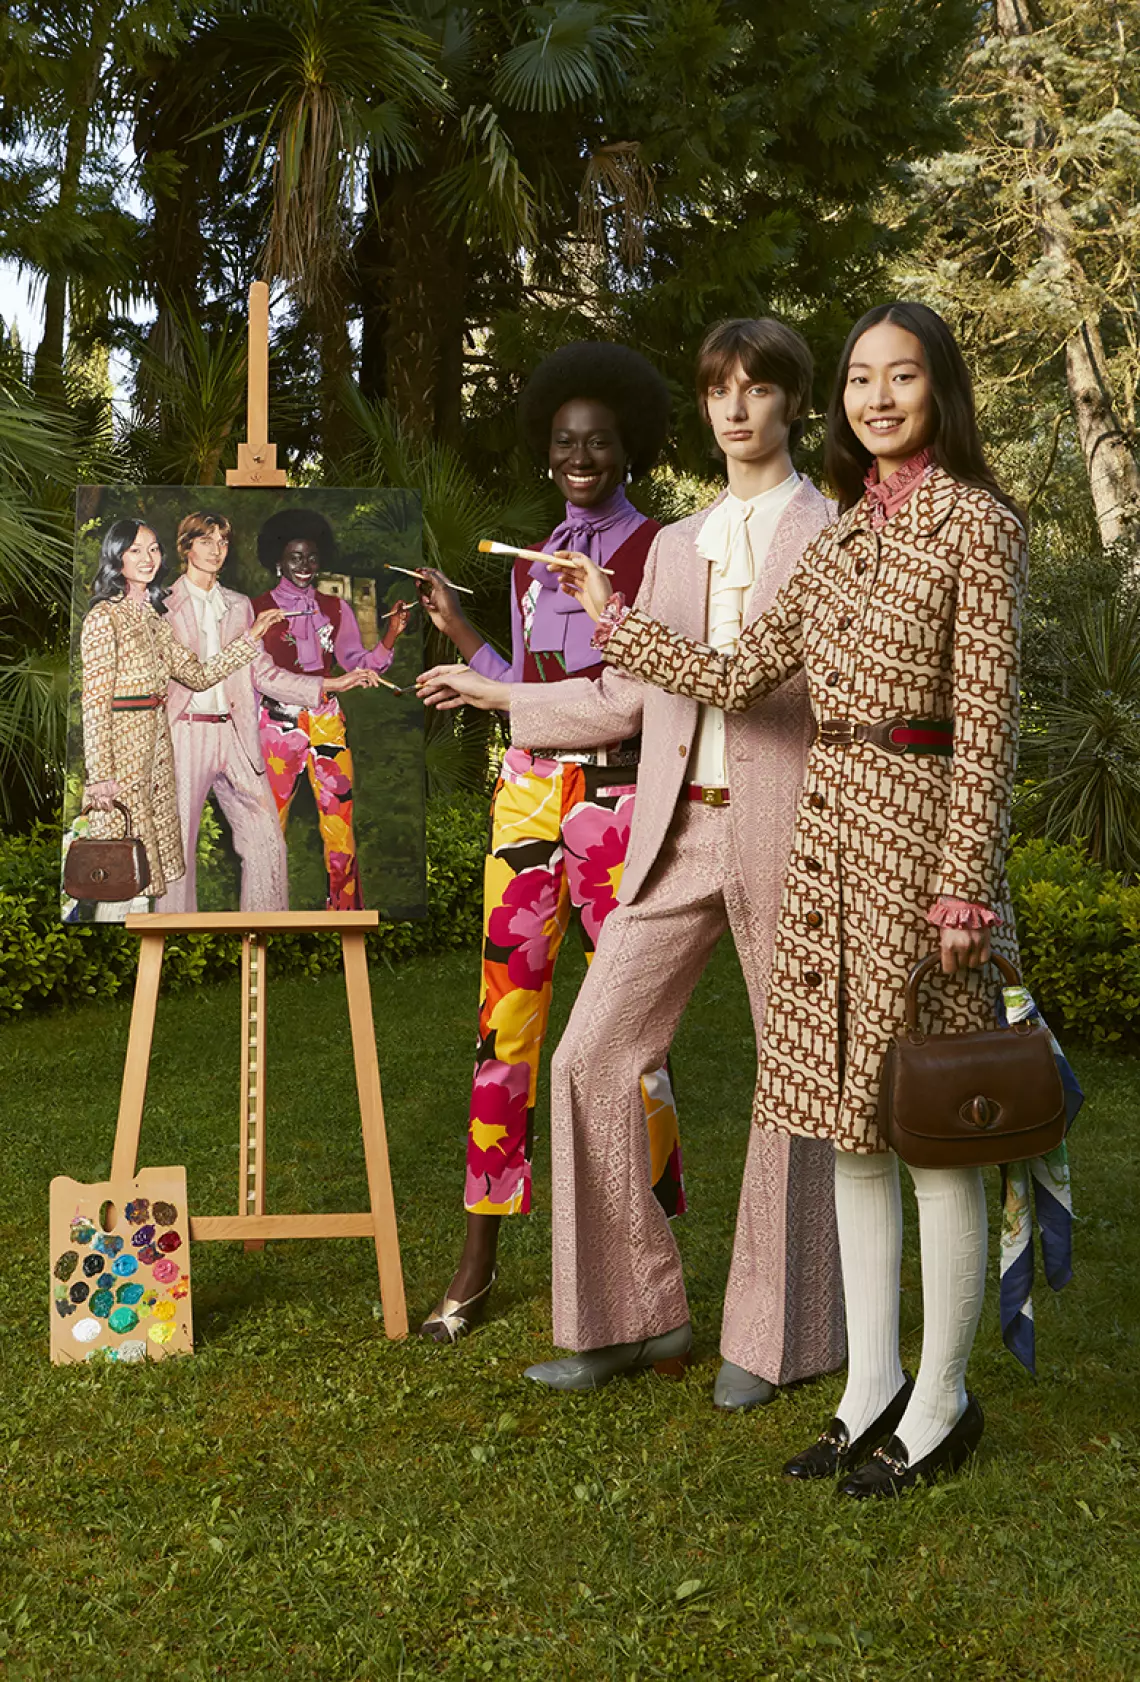 Meet The Man Who Made Millennials Fall In Love With Gucci